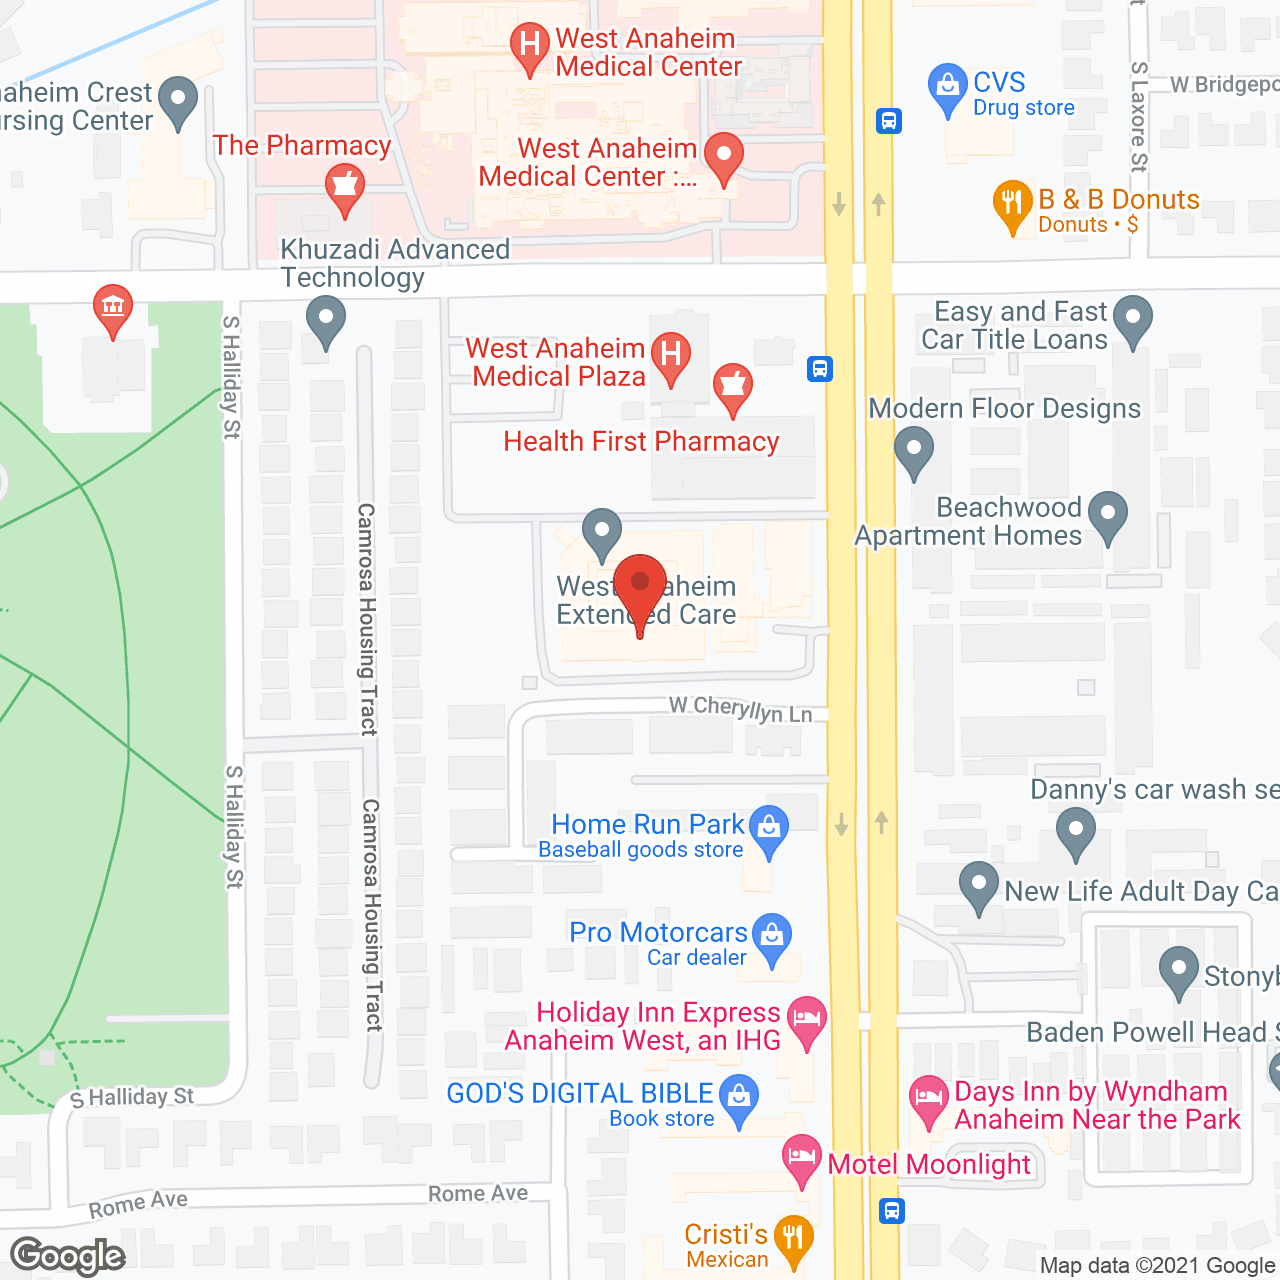 West Anaheim Extended Care in google map